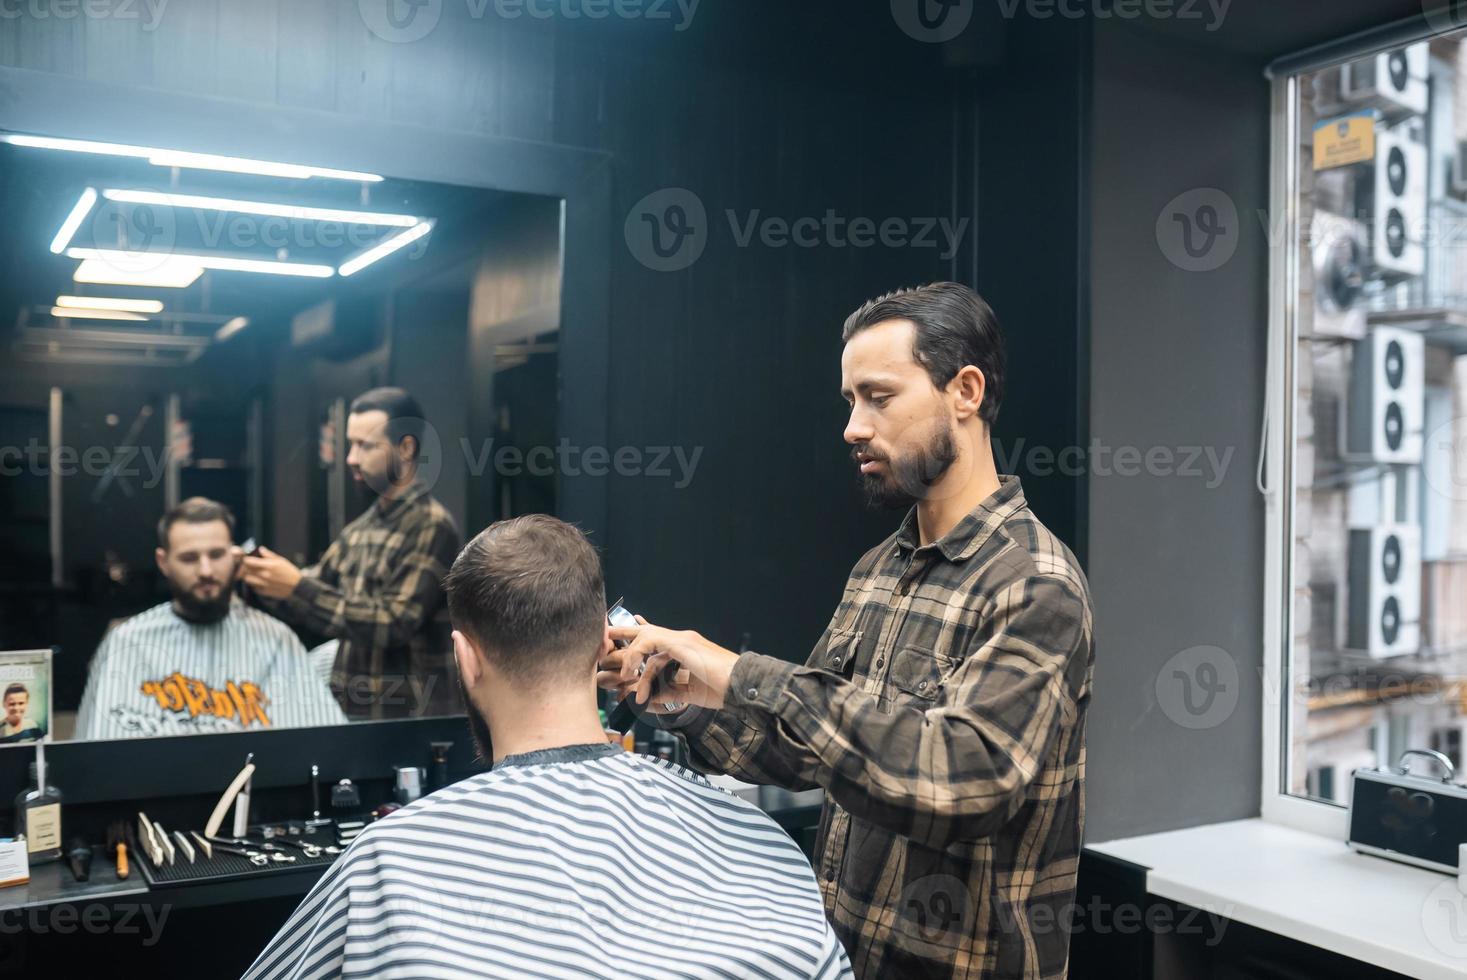 Master in barbershop makes men's haircutting with hair clipper photo